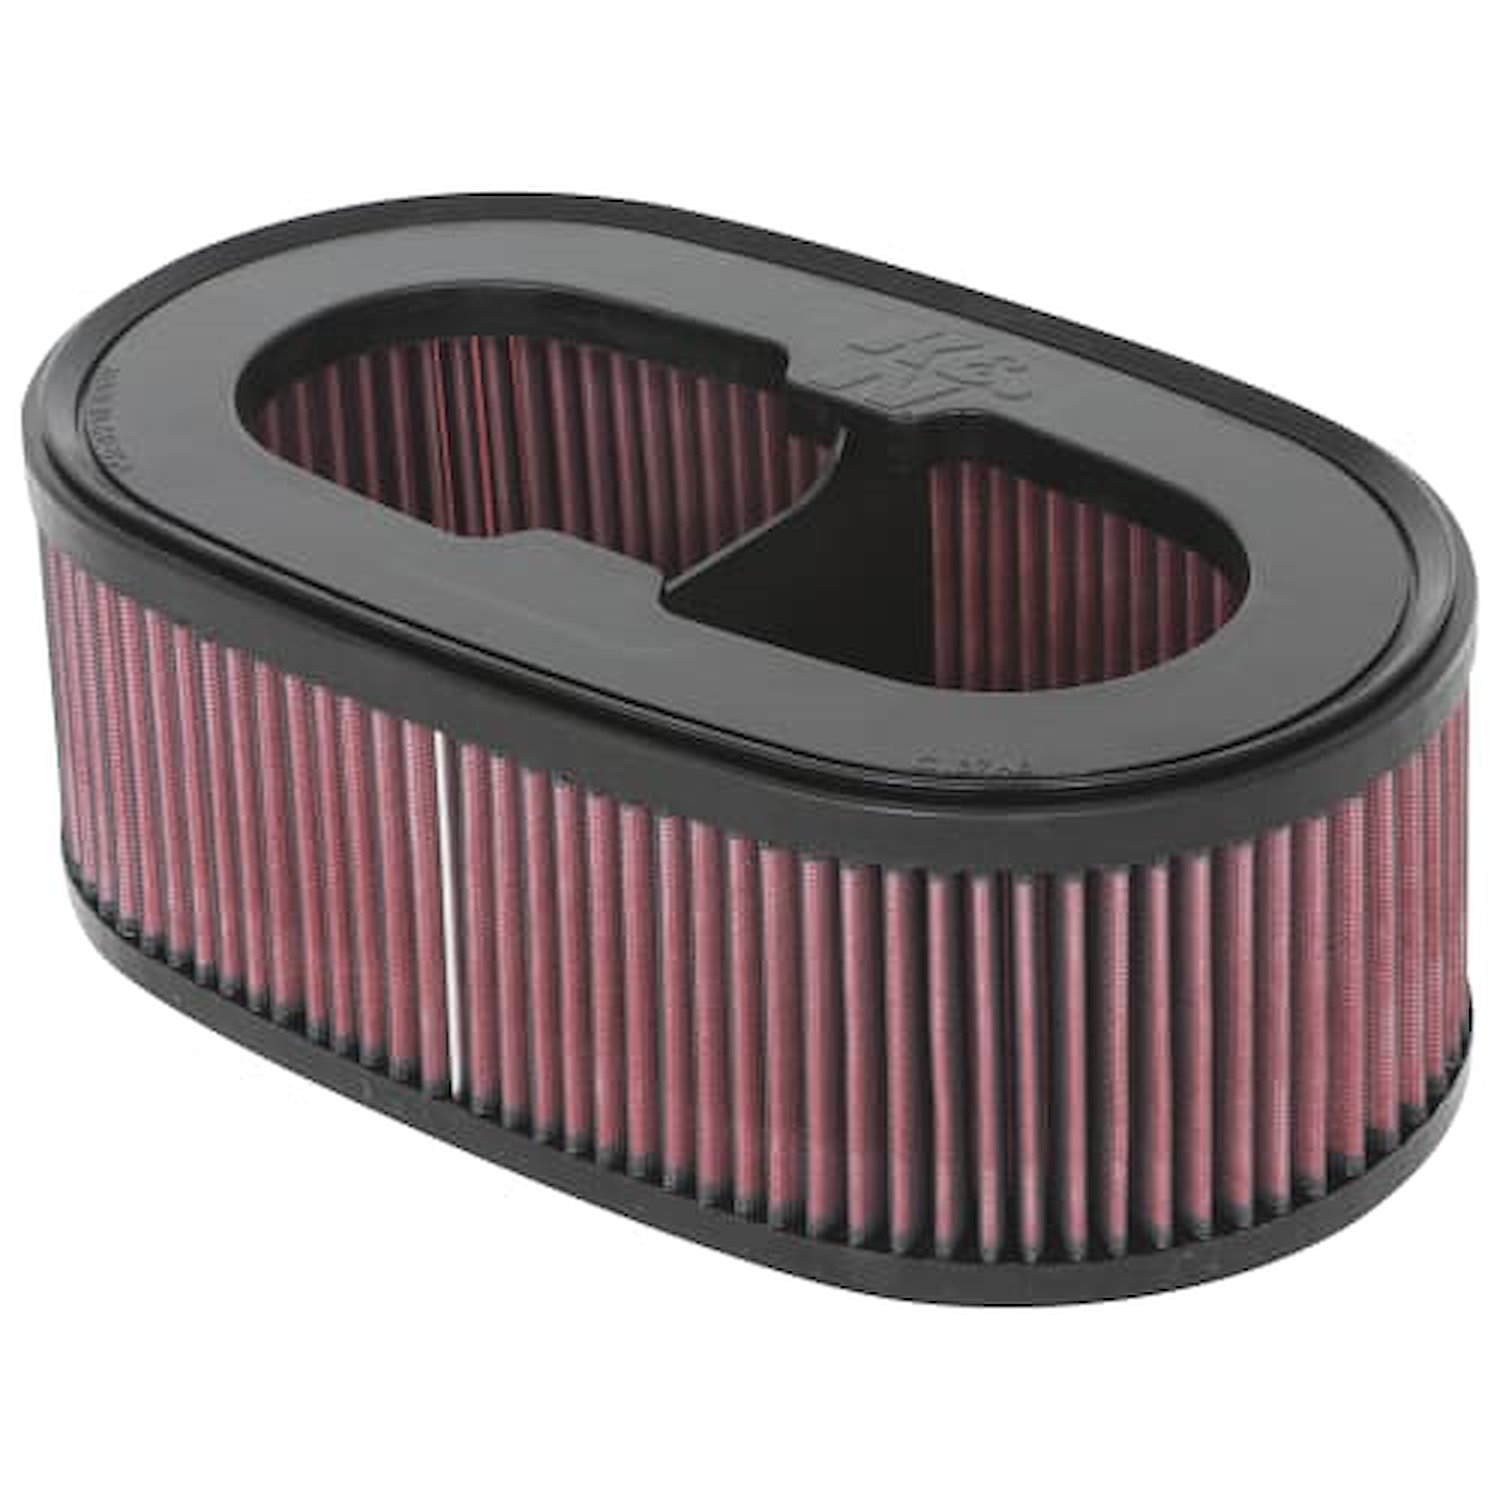 High-Performance OE-Style Replacement Filter for Chevy Corvette C8 6.2L V8